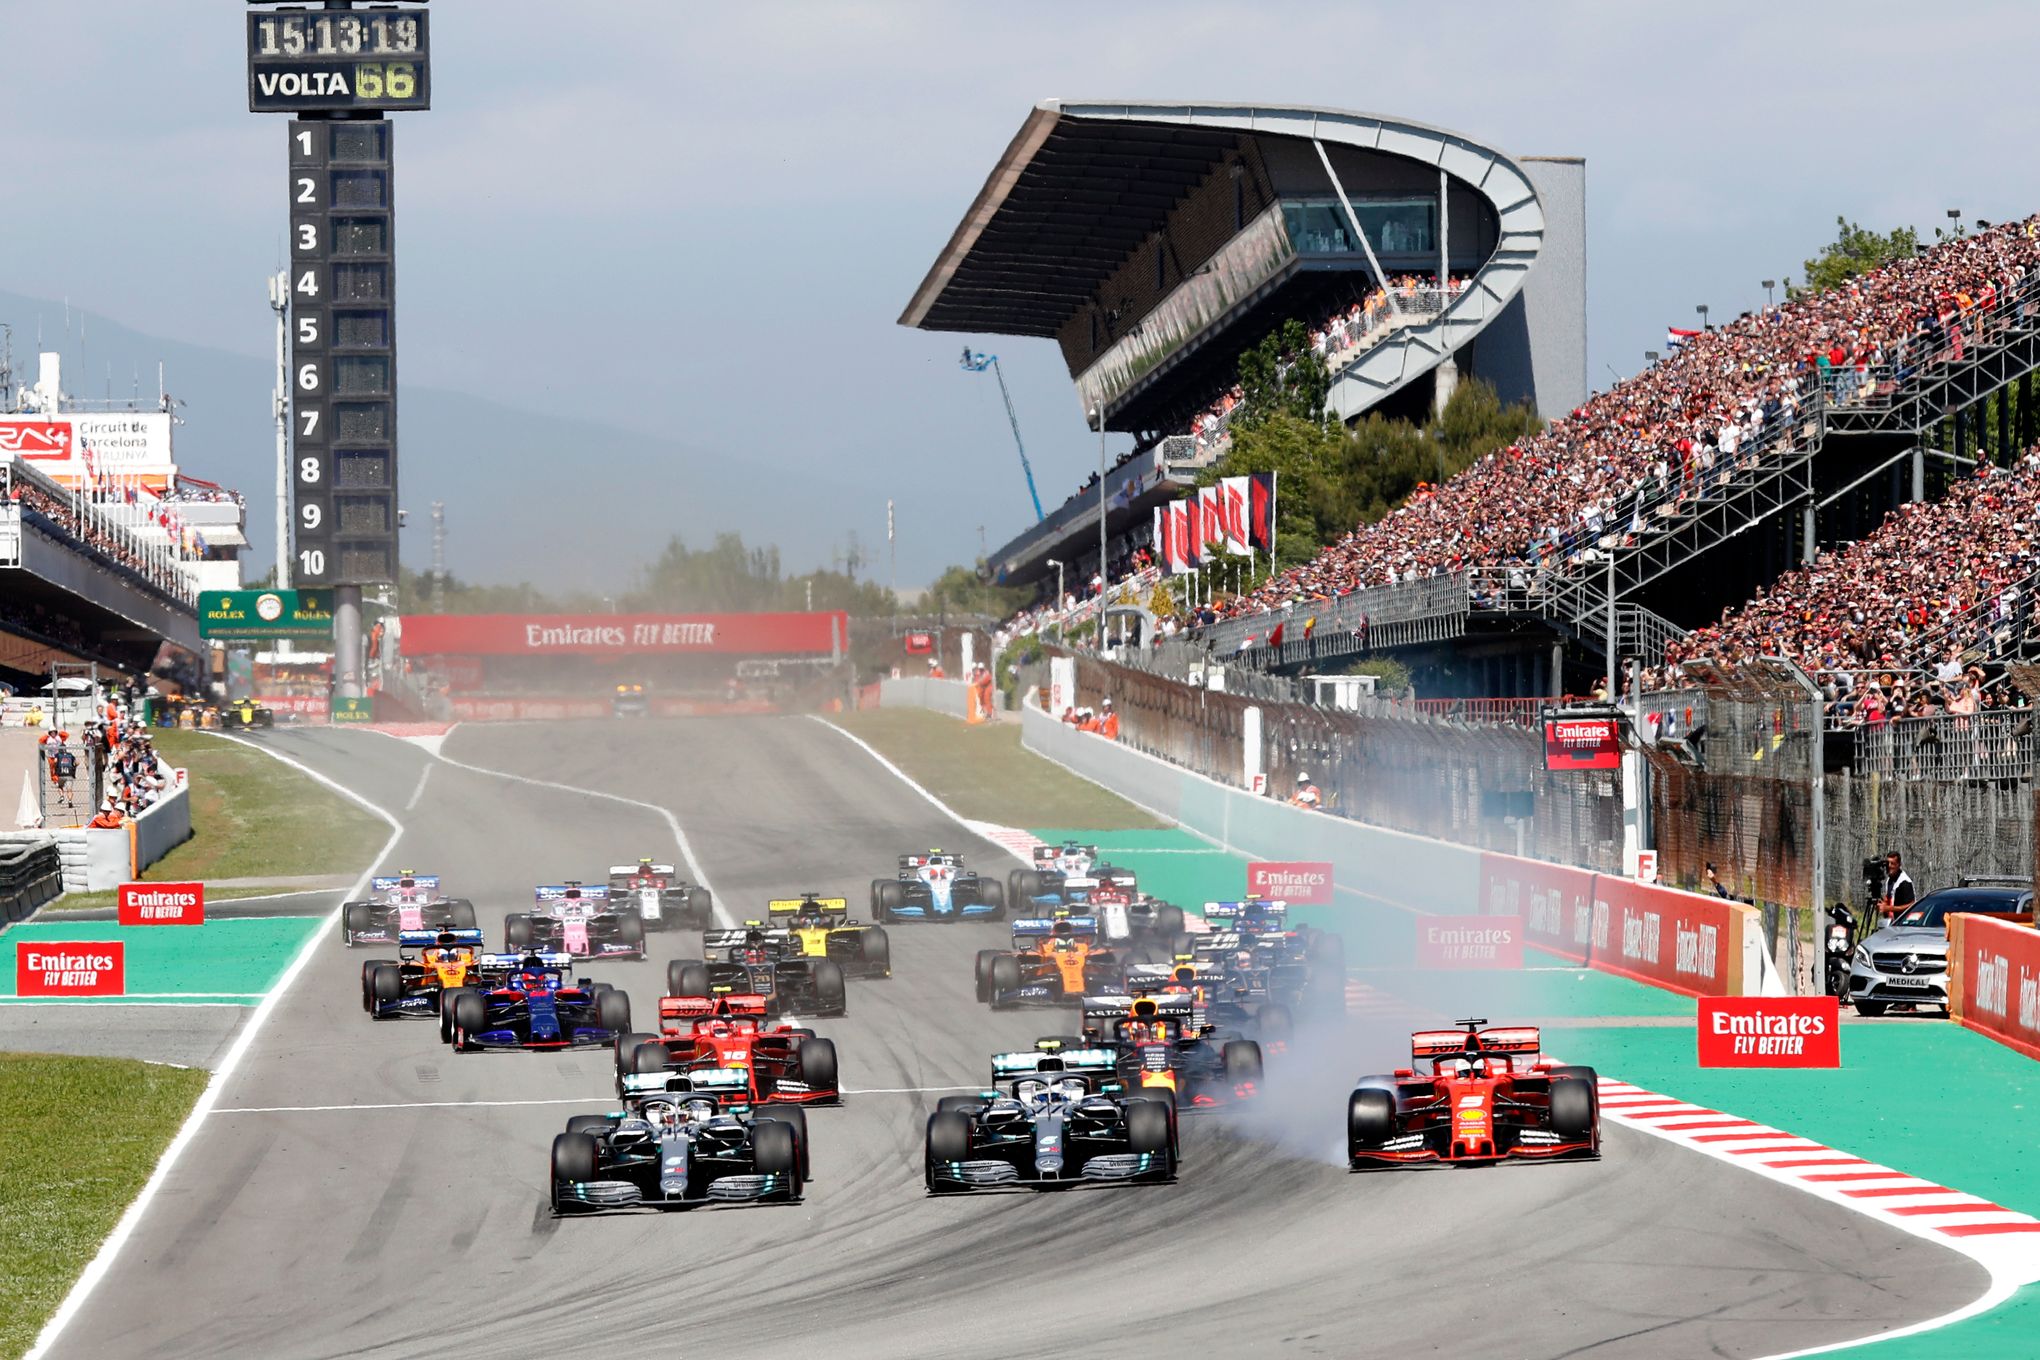 Spanish GP: F1 will renegotiate fees for races without fans